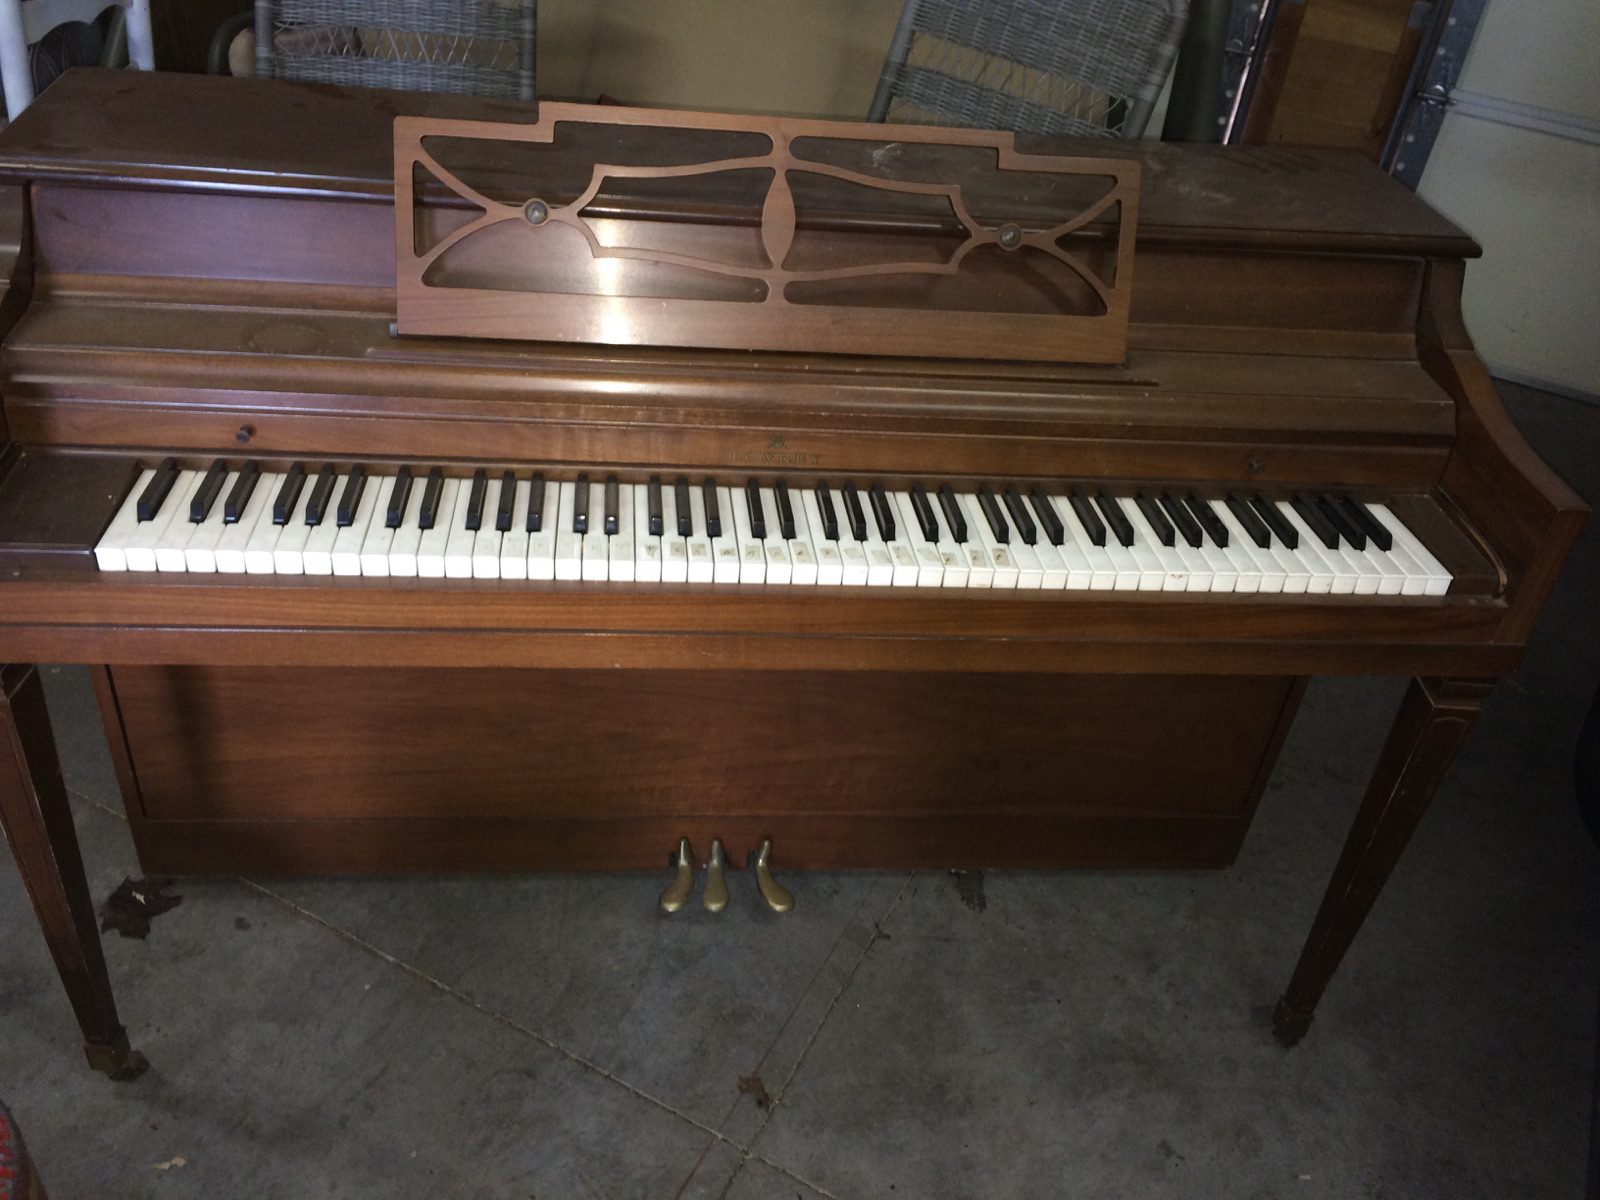 Piano Removal Services in Indianapolis